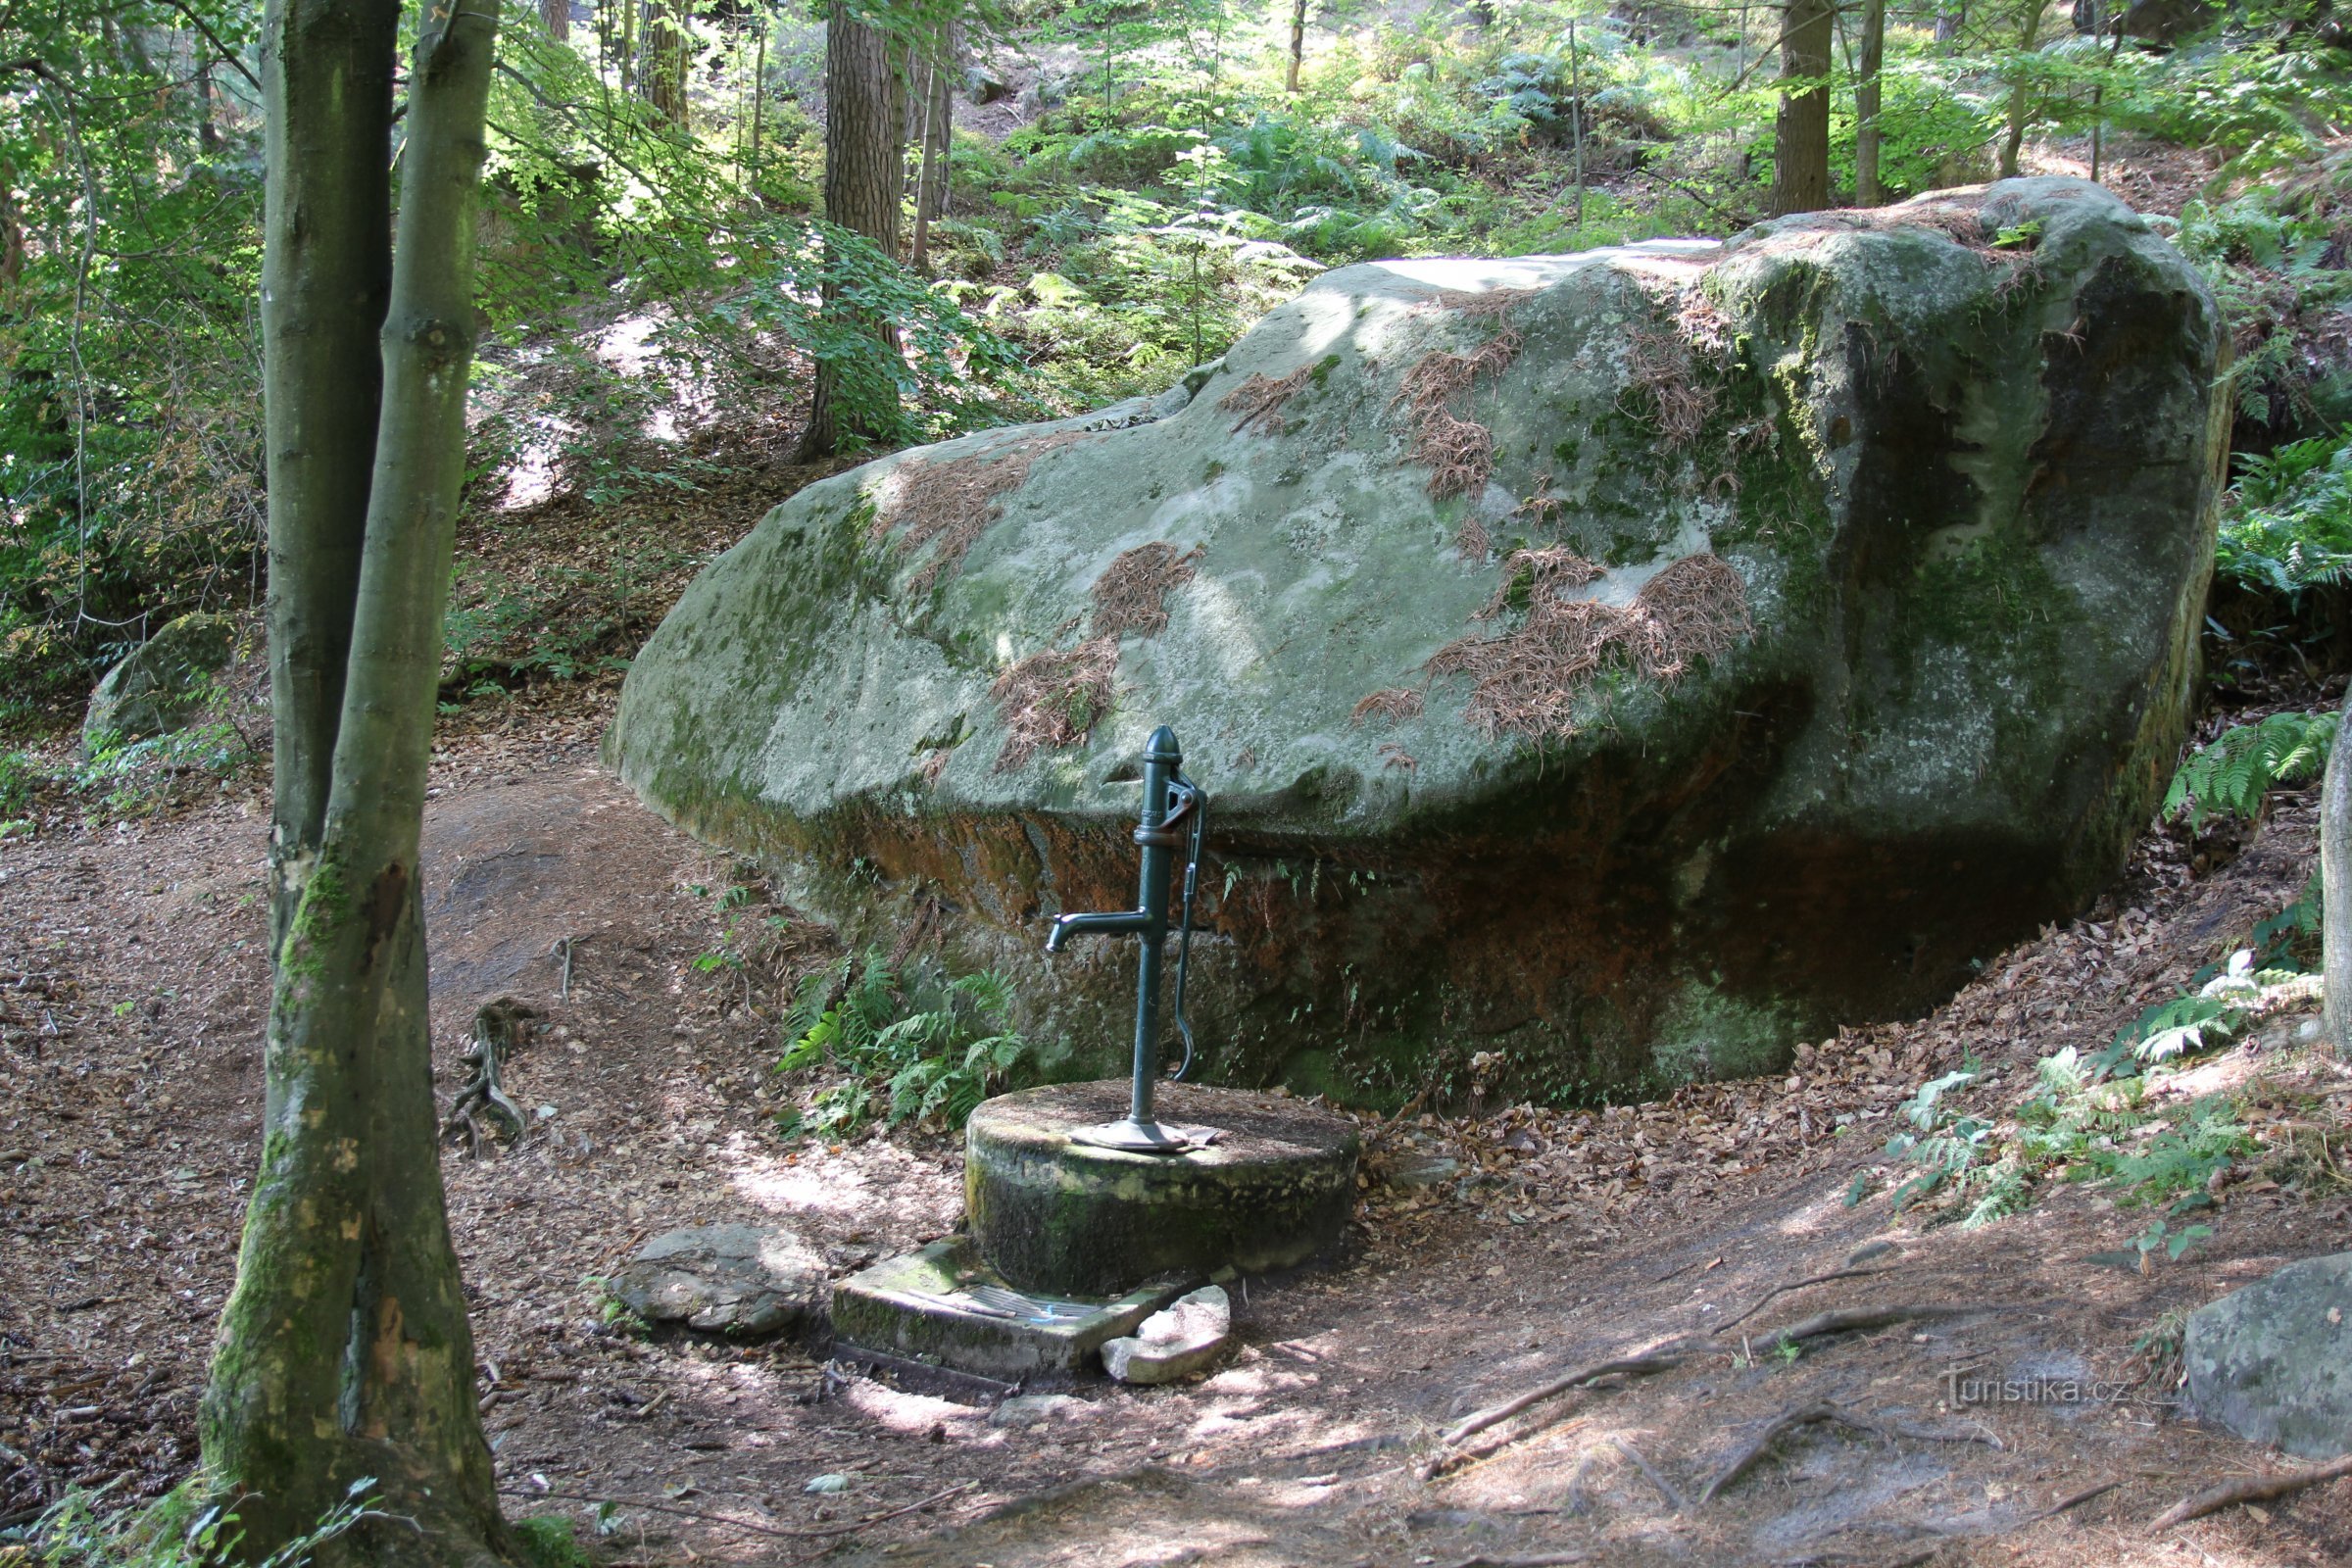 At Vondračka - a functional well with drinking water